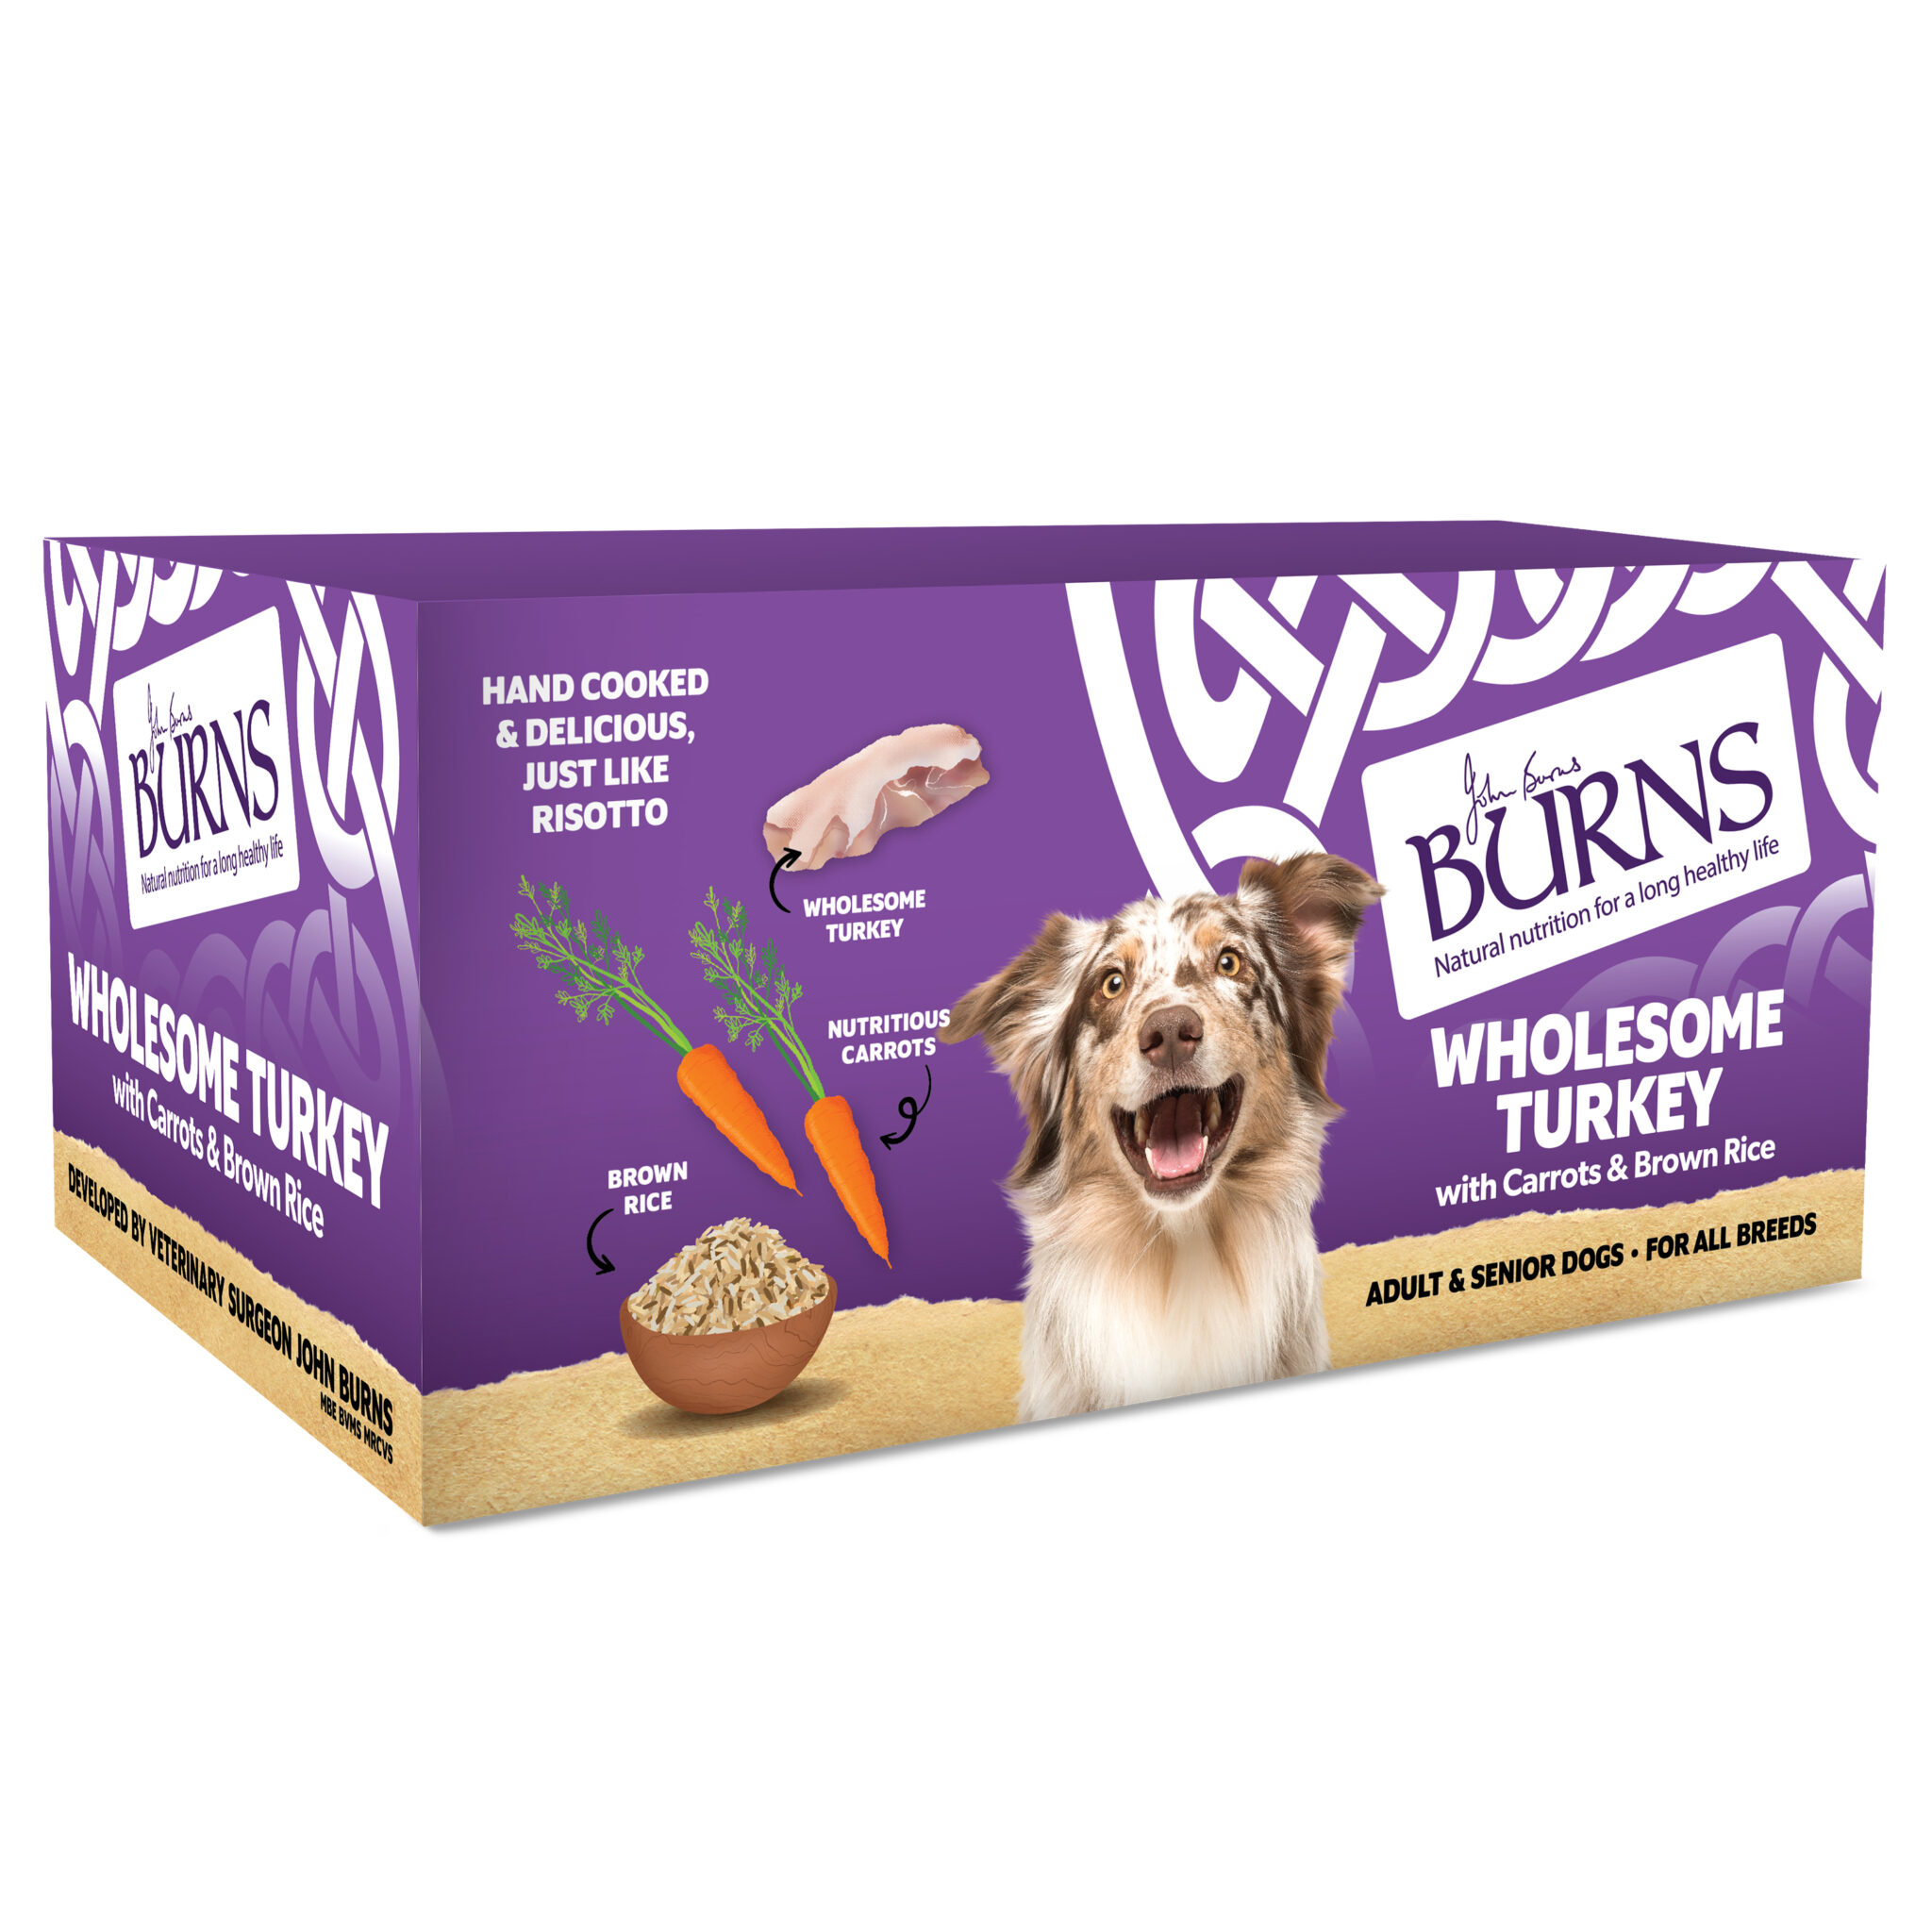 Suppliers of Burns Wet Food-Wholesome Turkey with Carrots & Brown Rice UK